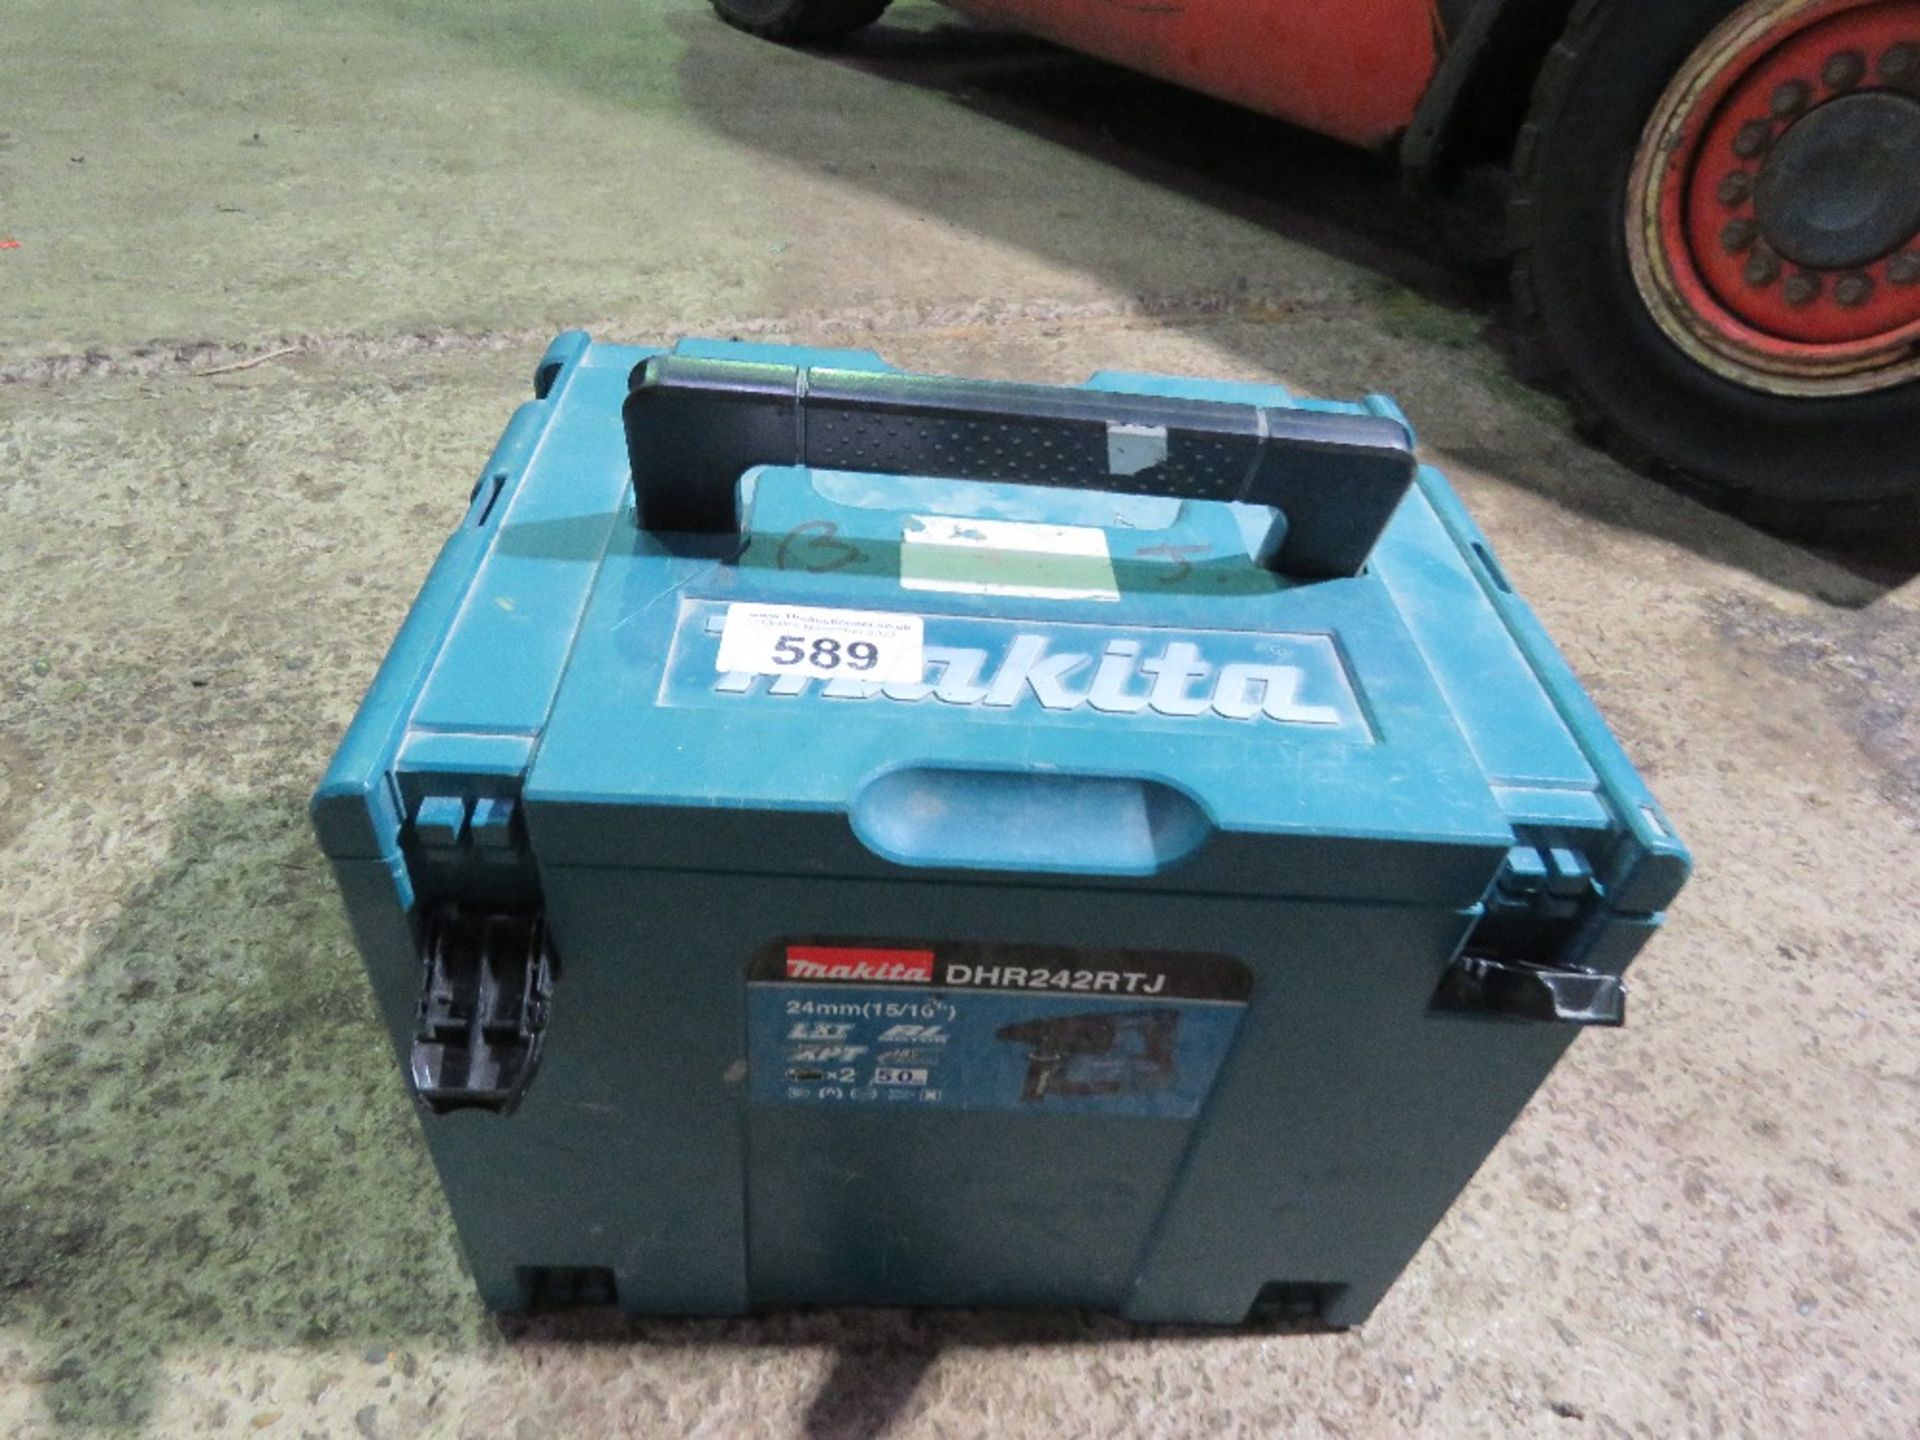 2X MAKITA 110V JIGSAWS SOURCED FROM LARGE CONSTRUCTION COMPANY LIQUIDATION. - Image 2 of 4